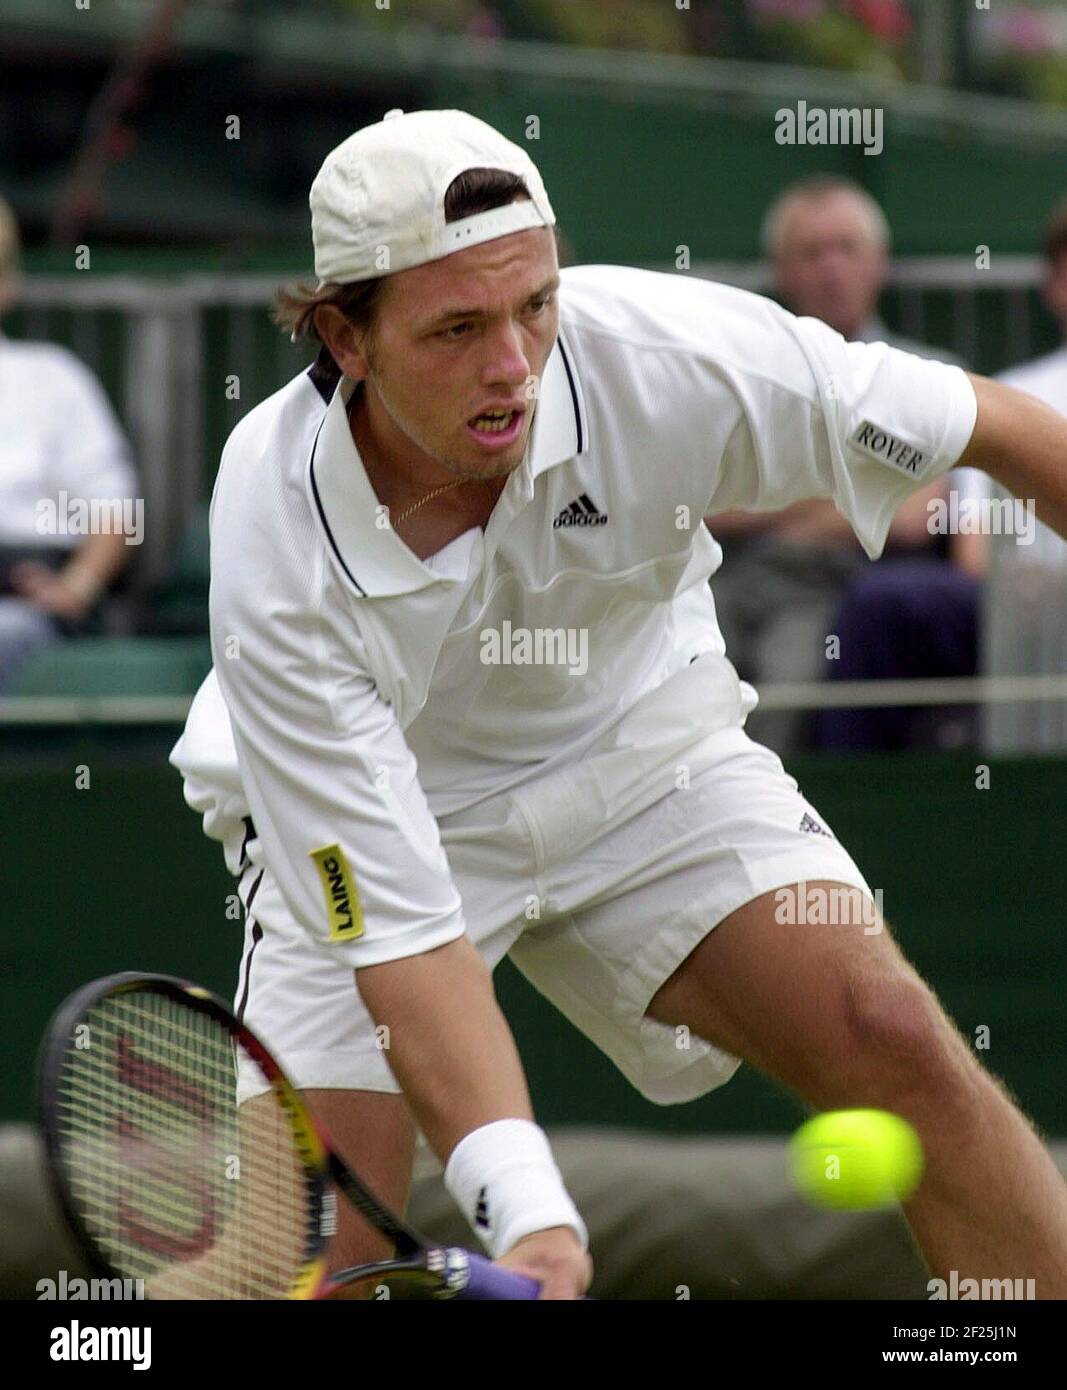 Lee Childs Tennis player at the Wimbledon Tennis Championships July 2000  Stock Photo - Alamy